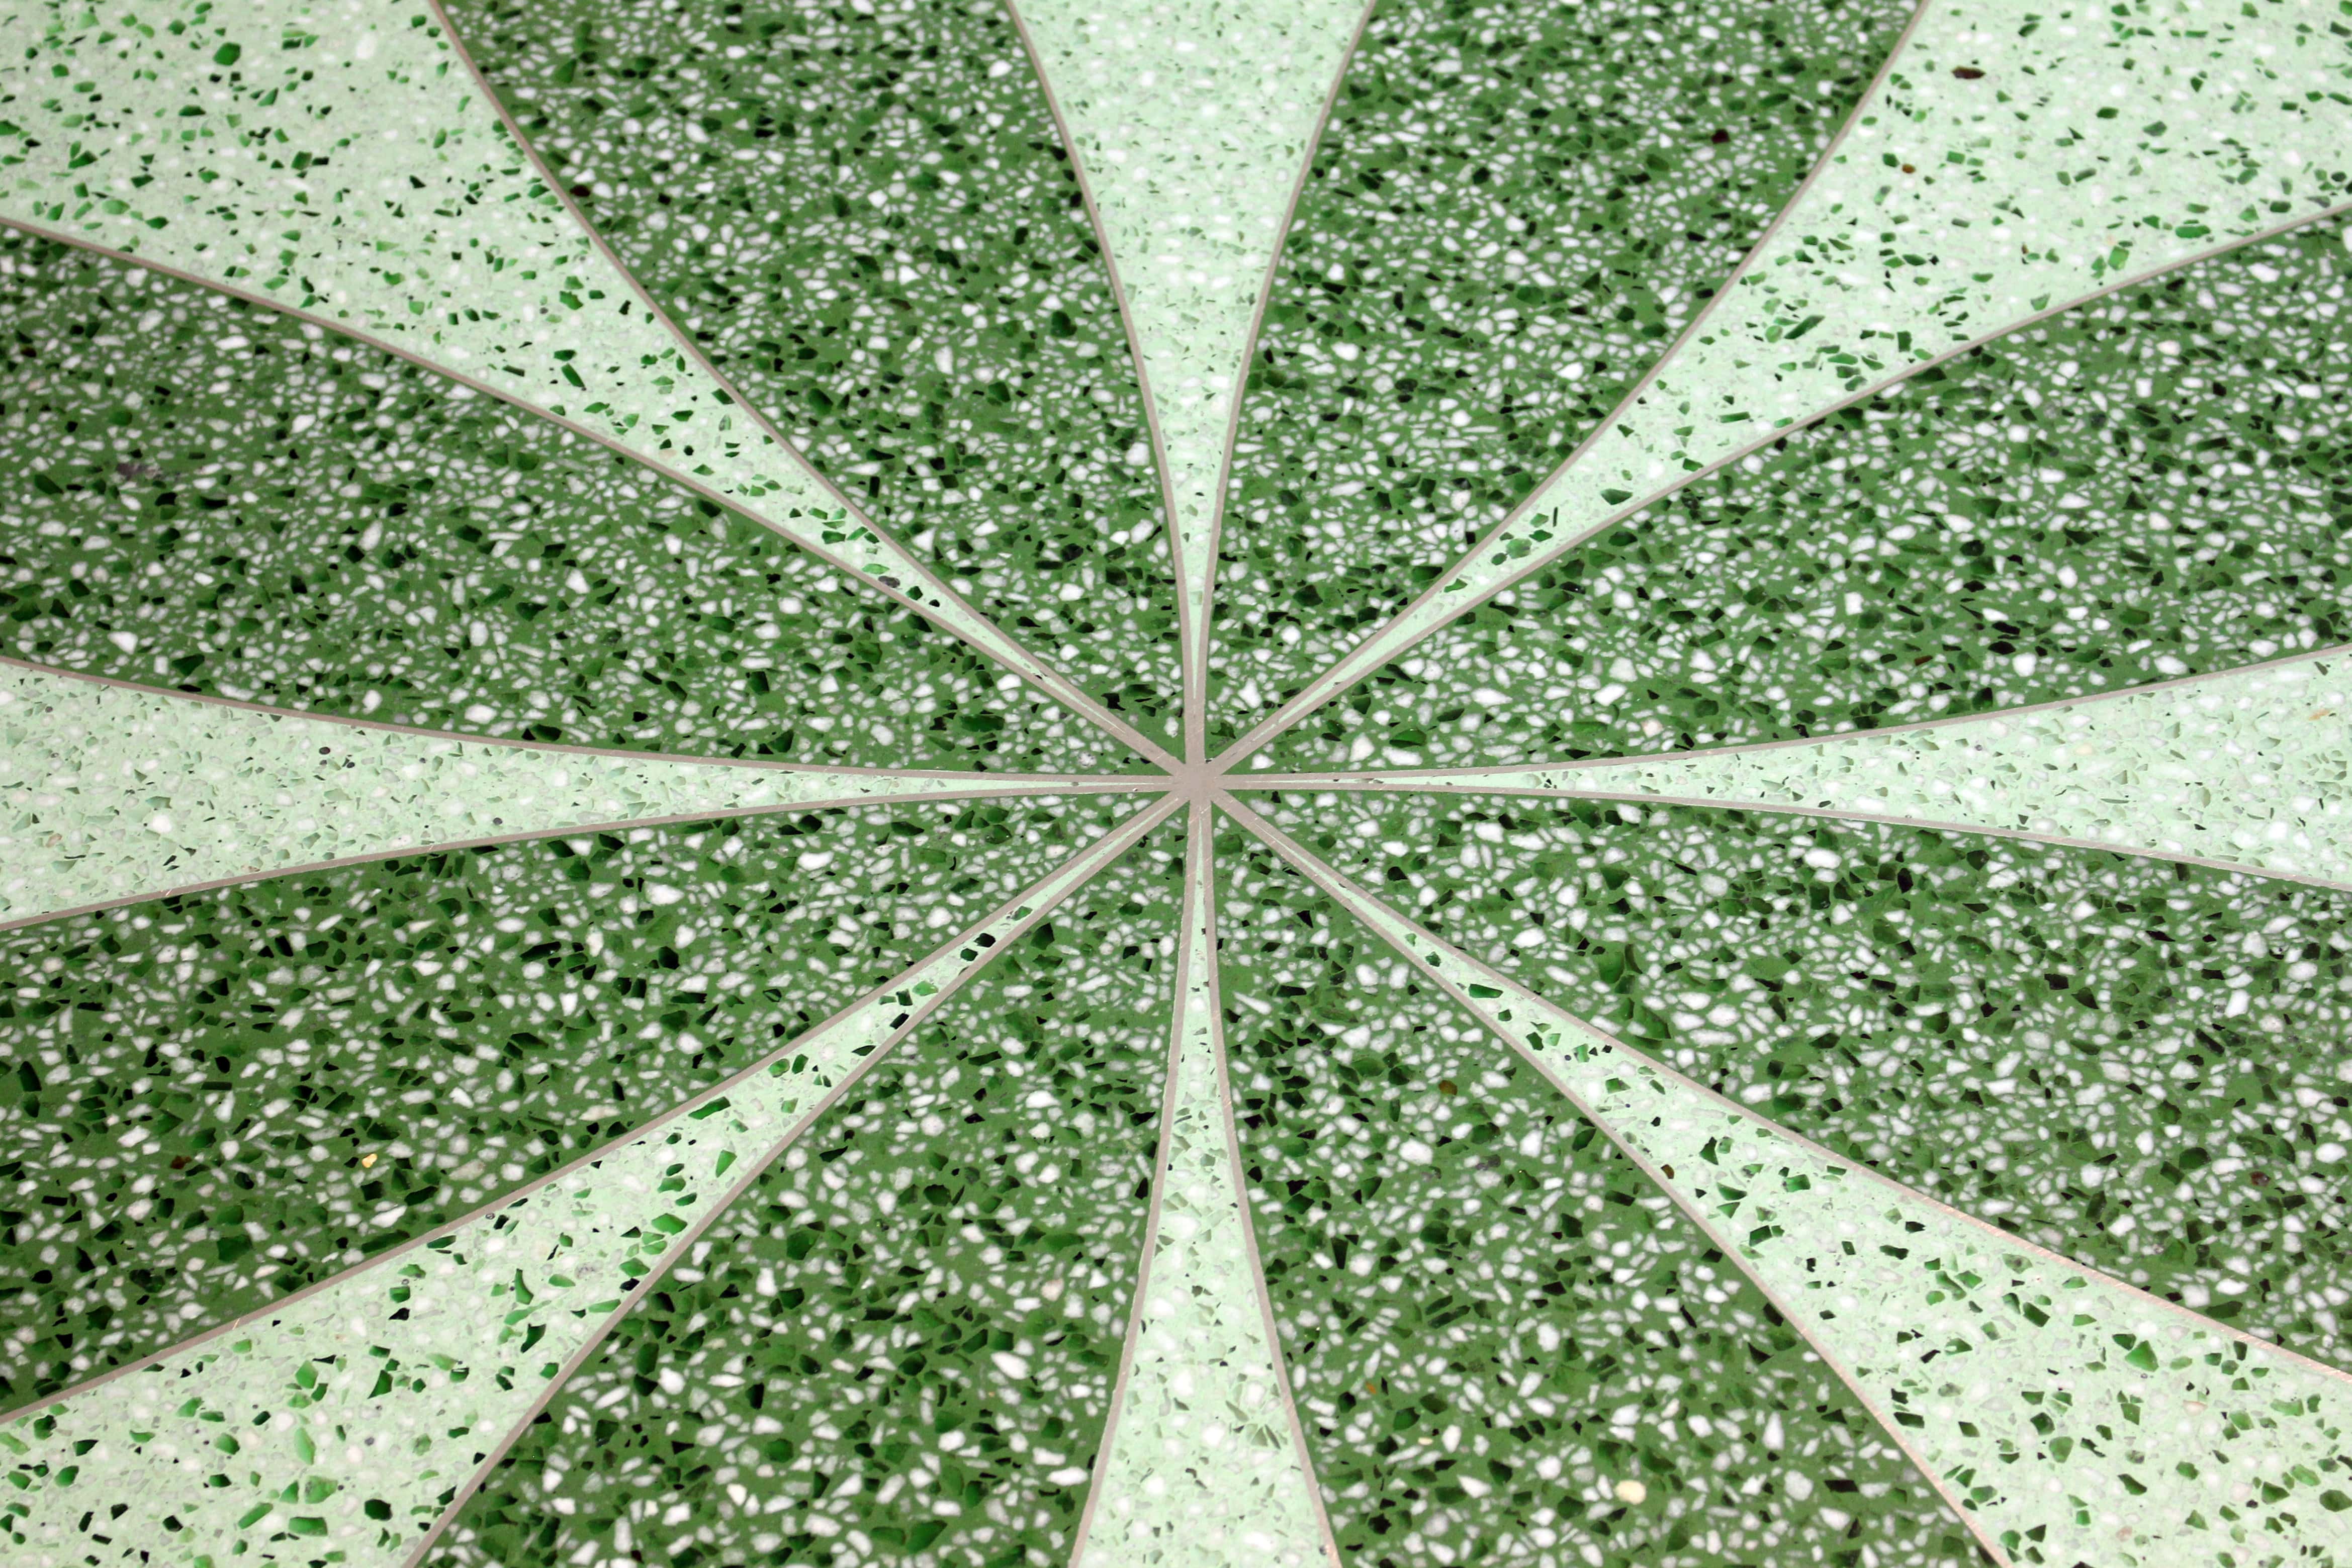 Choosing terrazzo flooring is a great way to use recycled materials